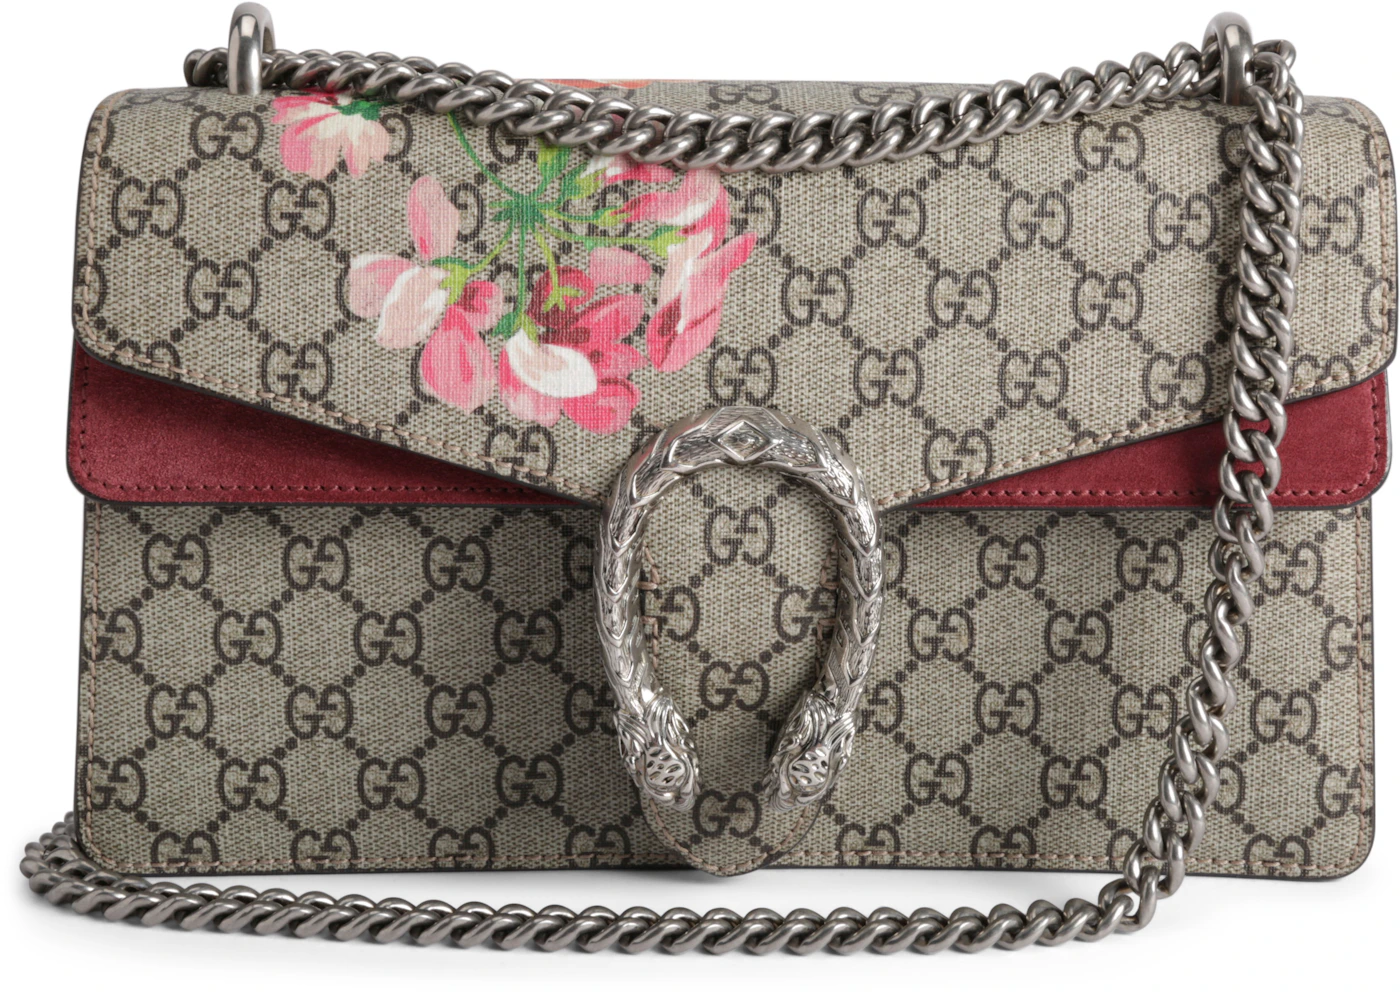 Gucci Gucci GG Blooms Supreme Canvas Shoulder Bag available at #Nordstrom